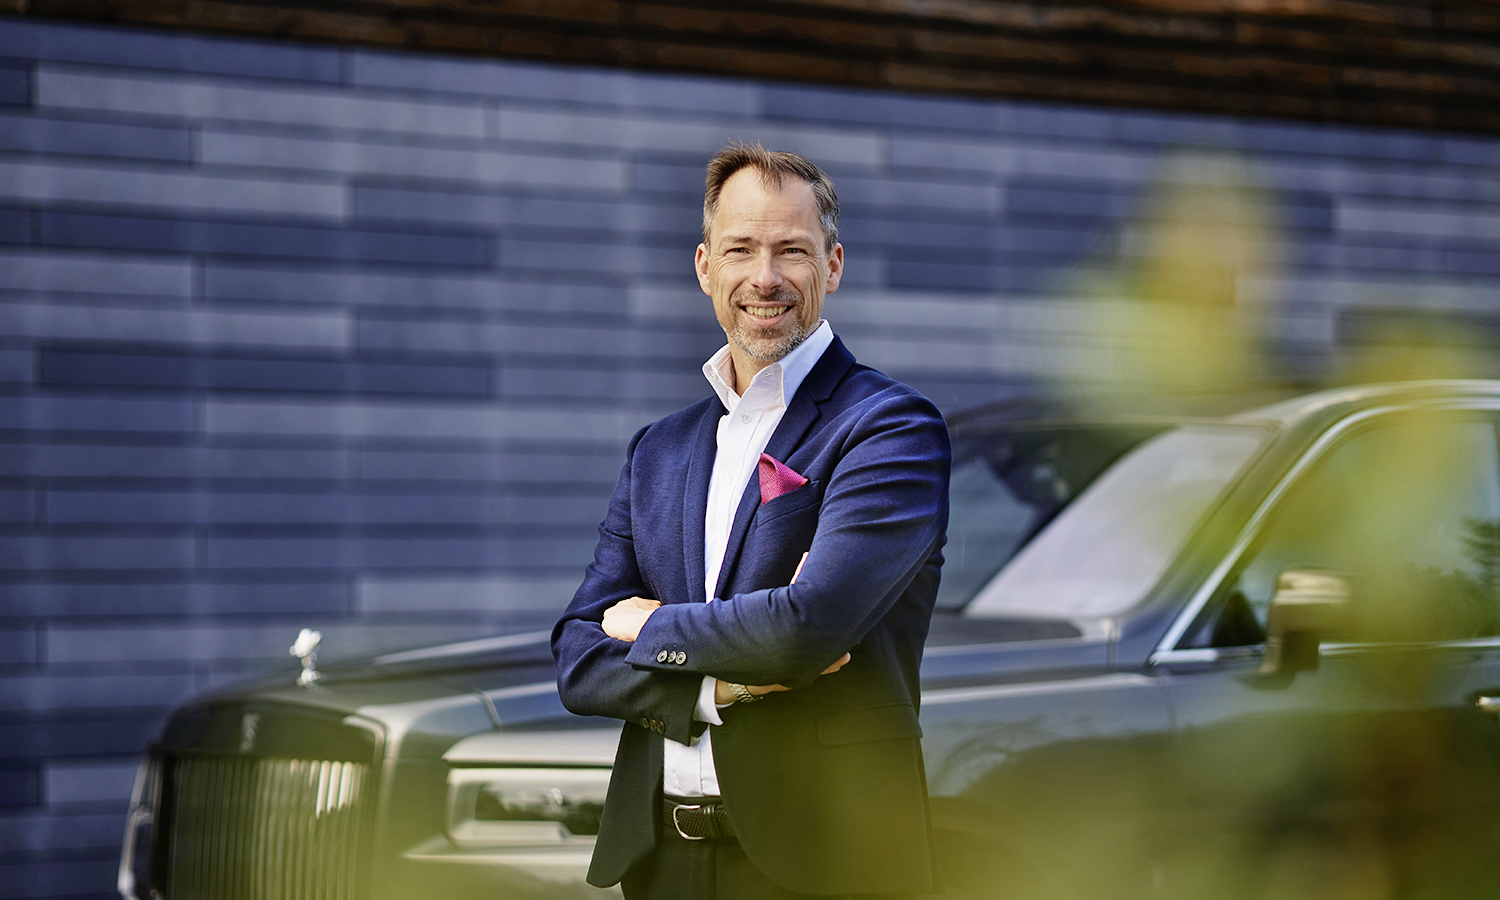 ANDERS WARMING / APPOINTED DIRECTOR of DESIGN / ROLLS ROYCE